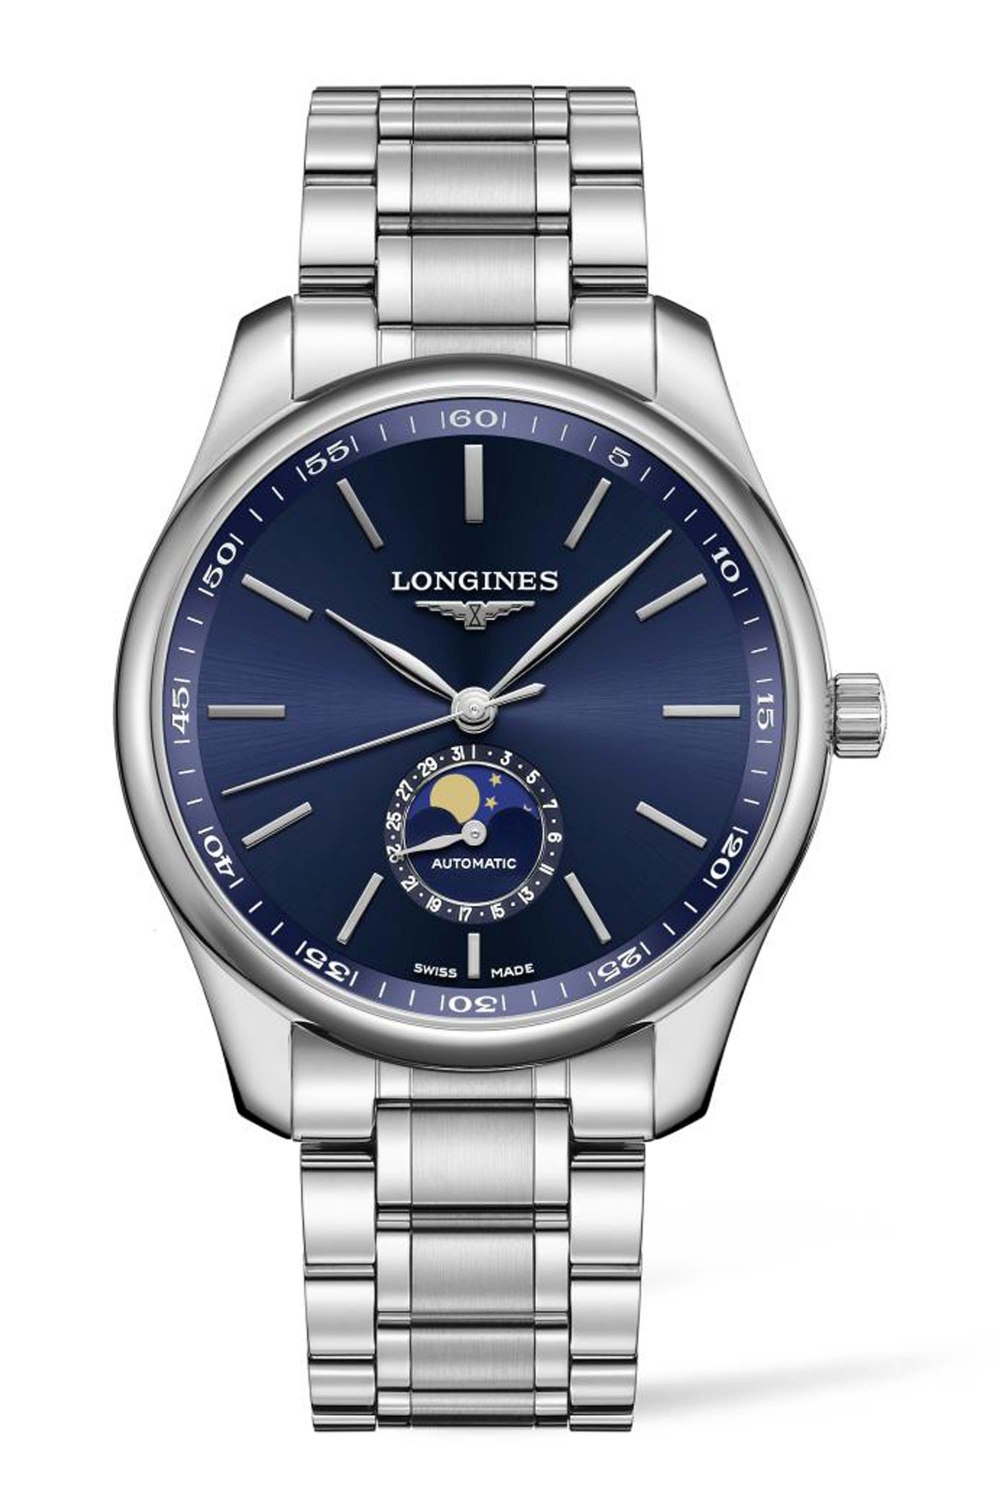 LONGINES The Longines Master Collection L2.919.4.92.6